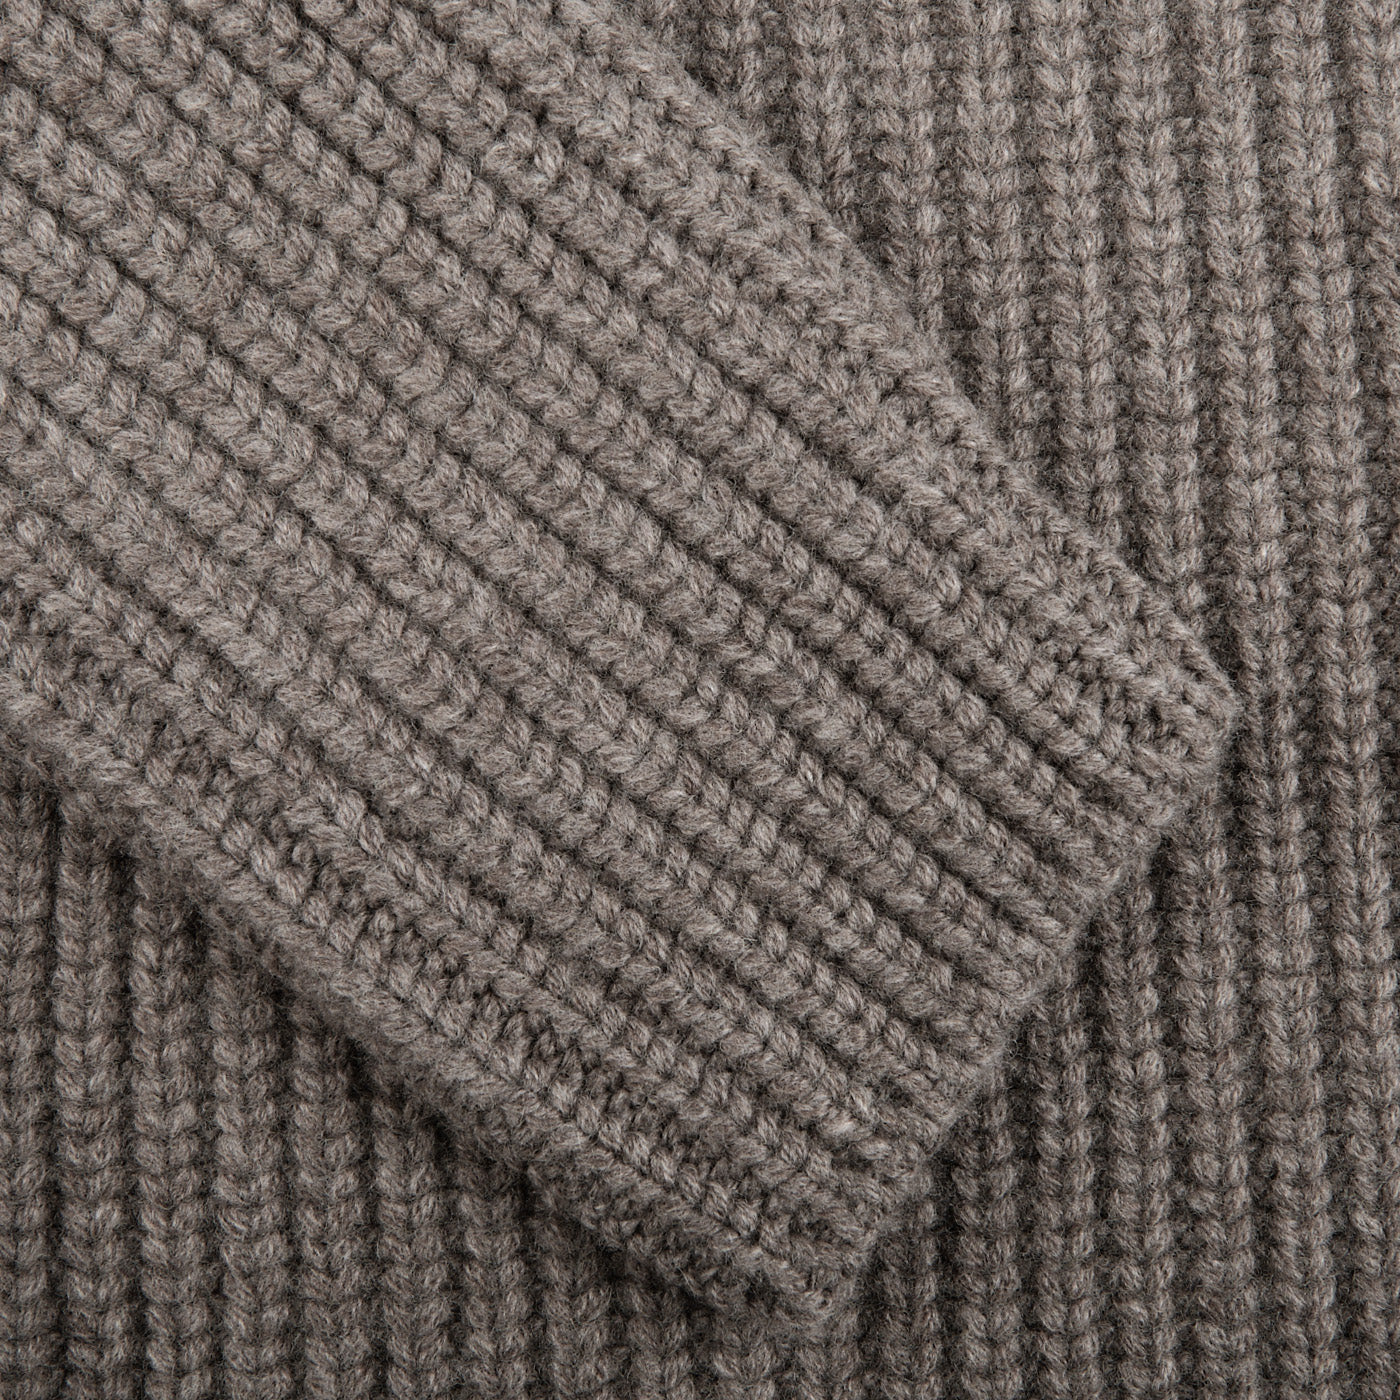 Taupe cable knit sweater – Made in italy